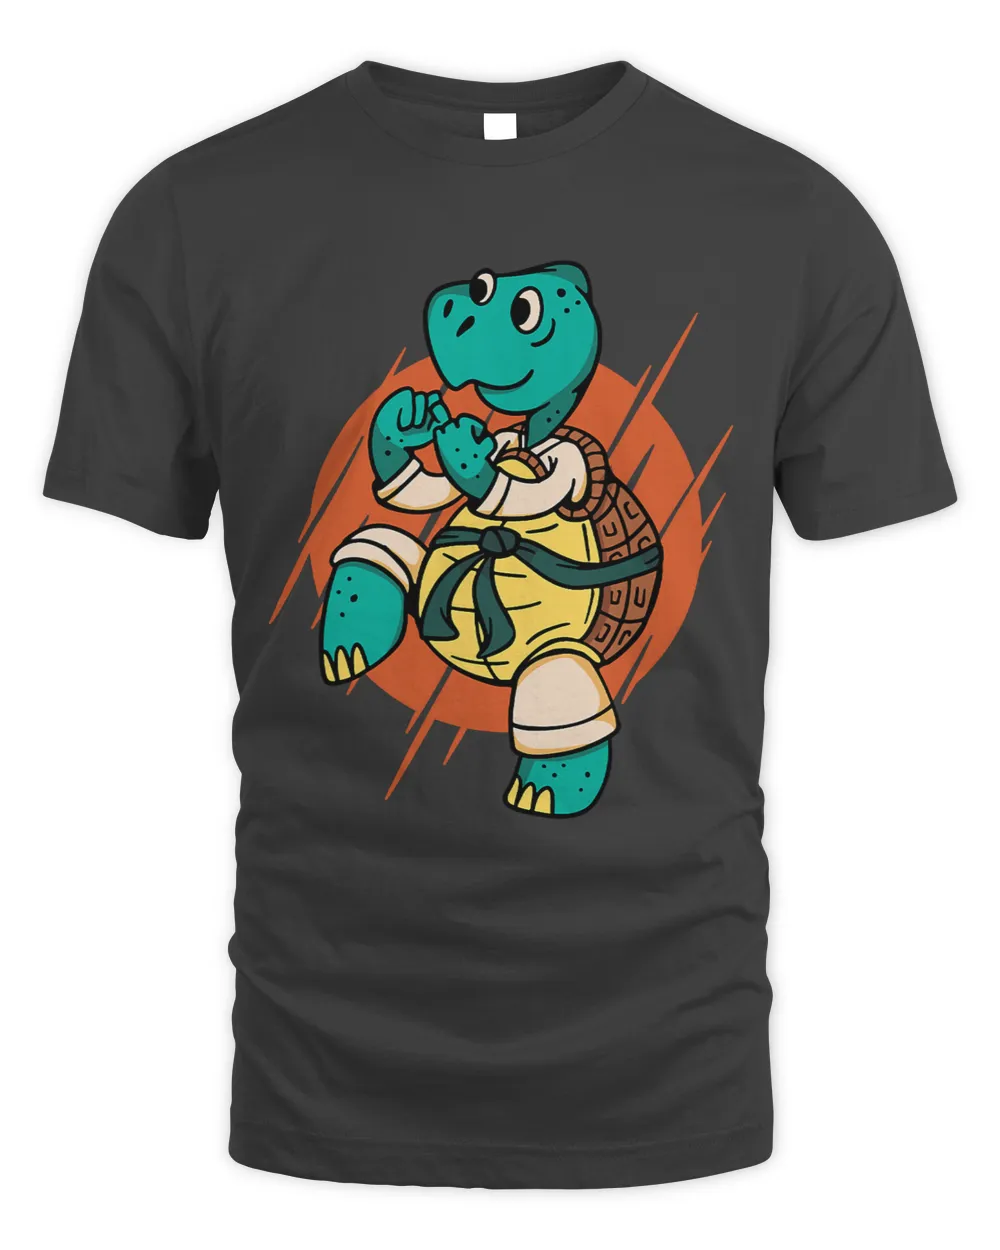 Funny and Cute Japanese Karate Turtle